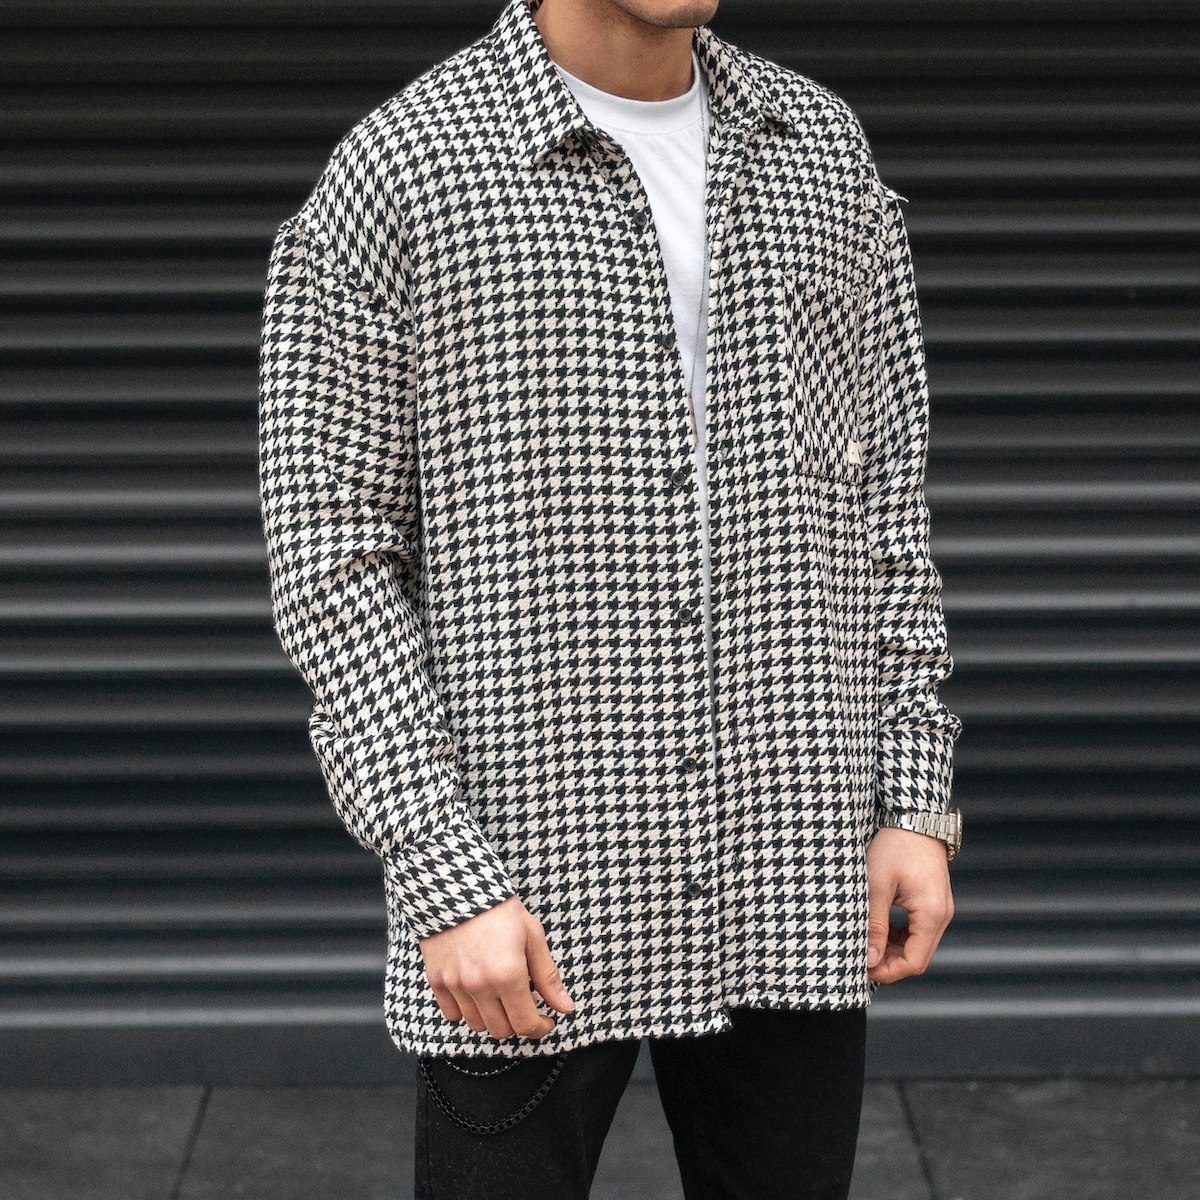 Men's Plaid Patterned Houndstooth Oversize Shirt In Black & White